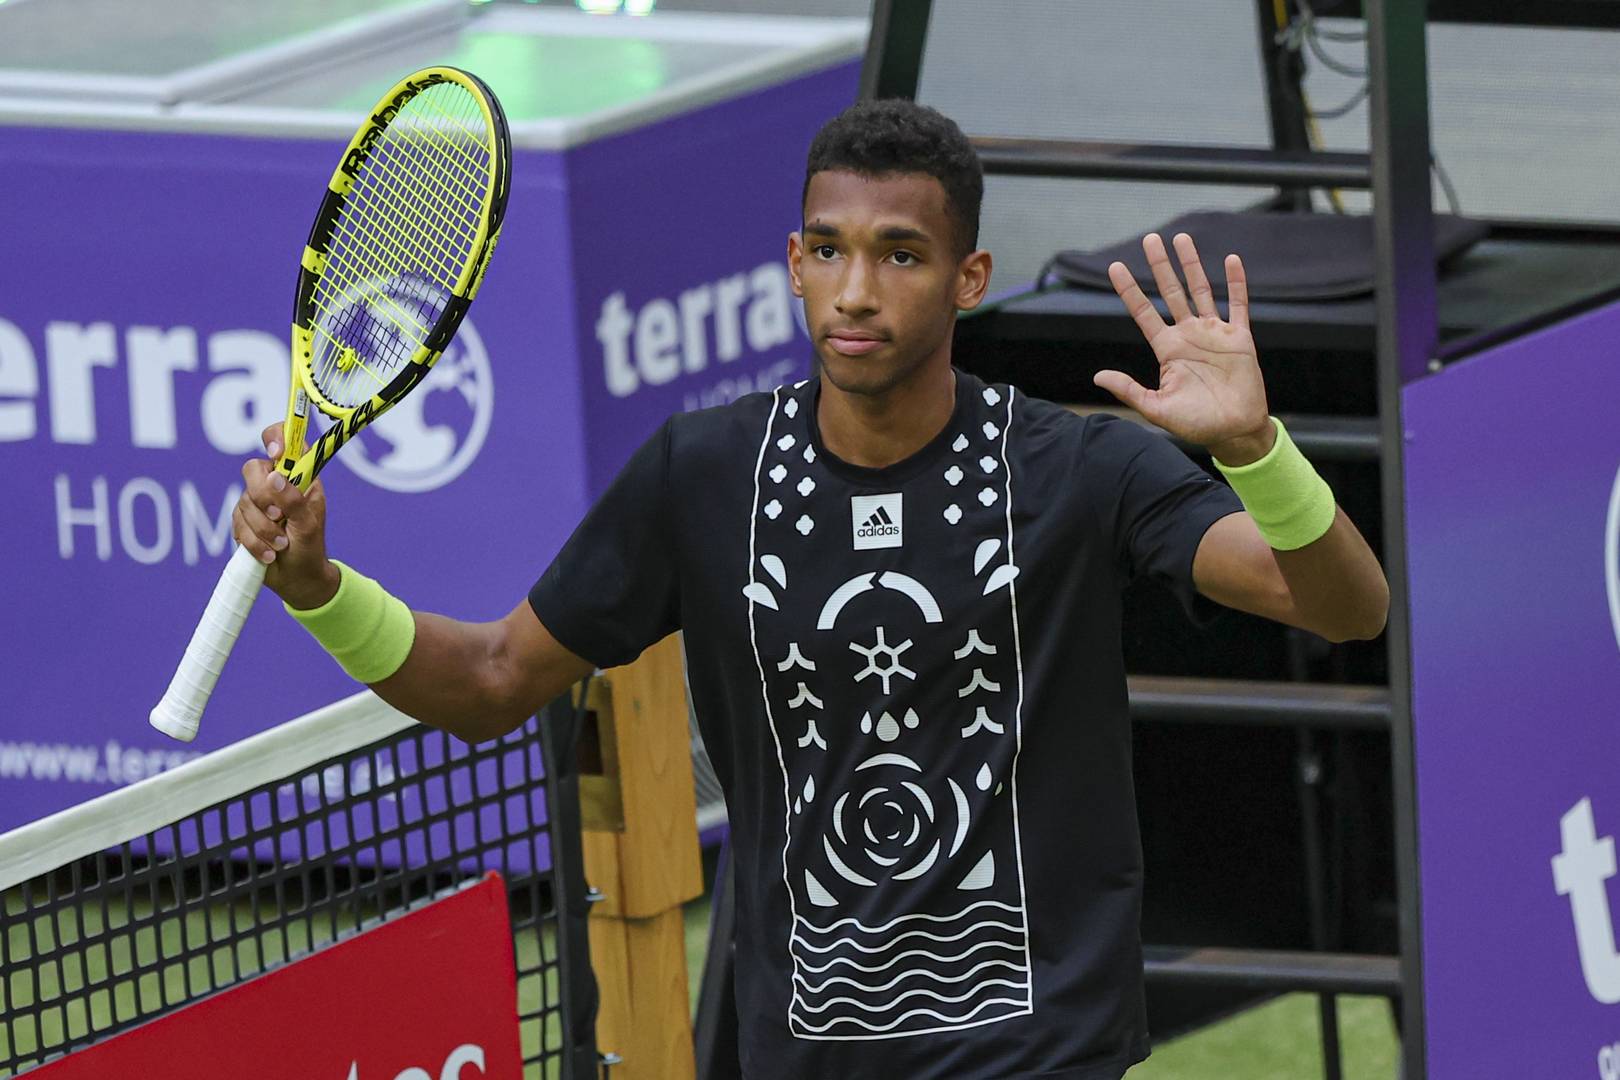 Felix Auger-Aliassime has to cancel due to injury